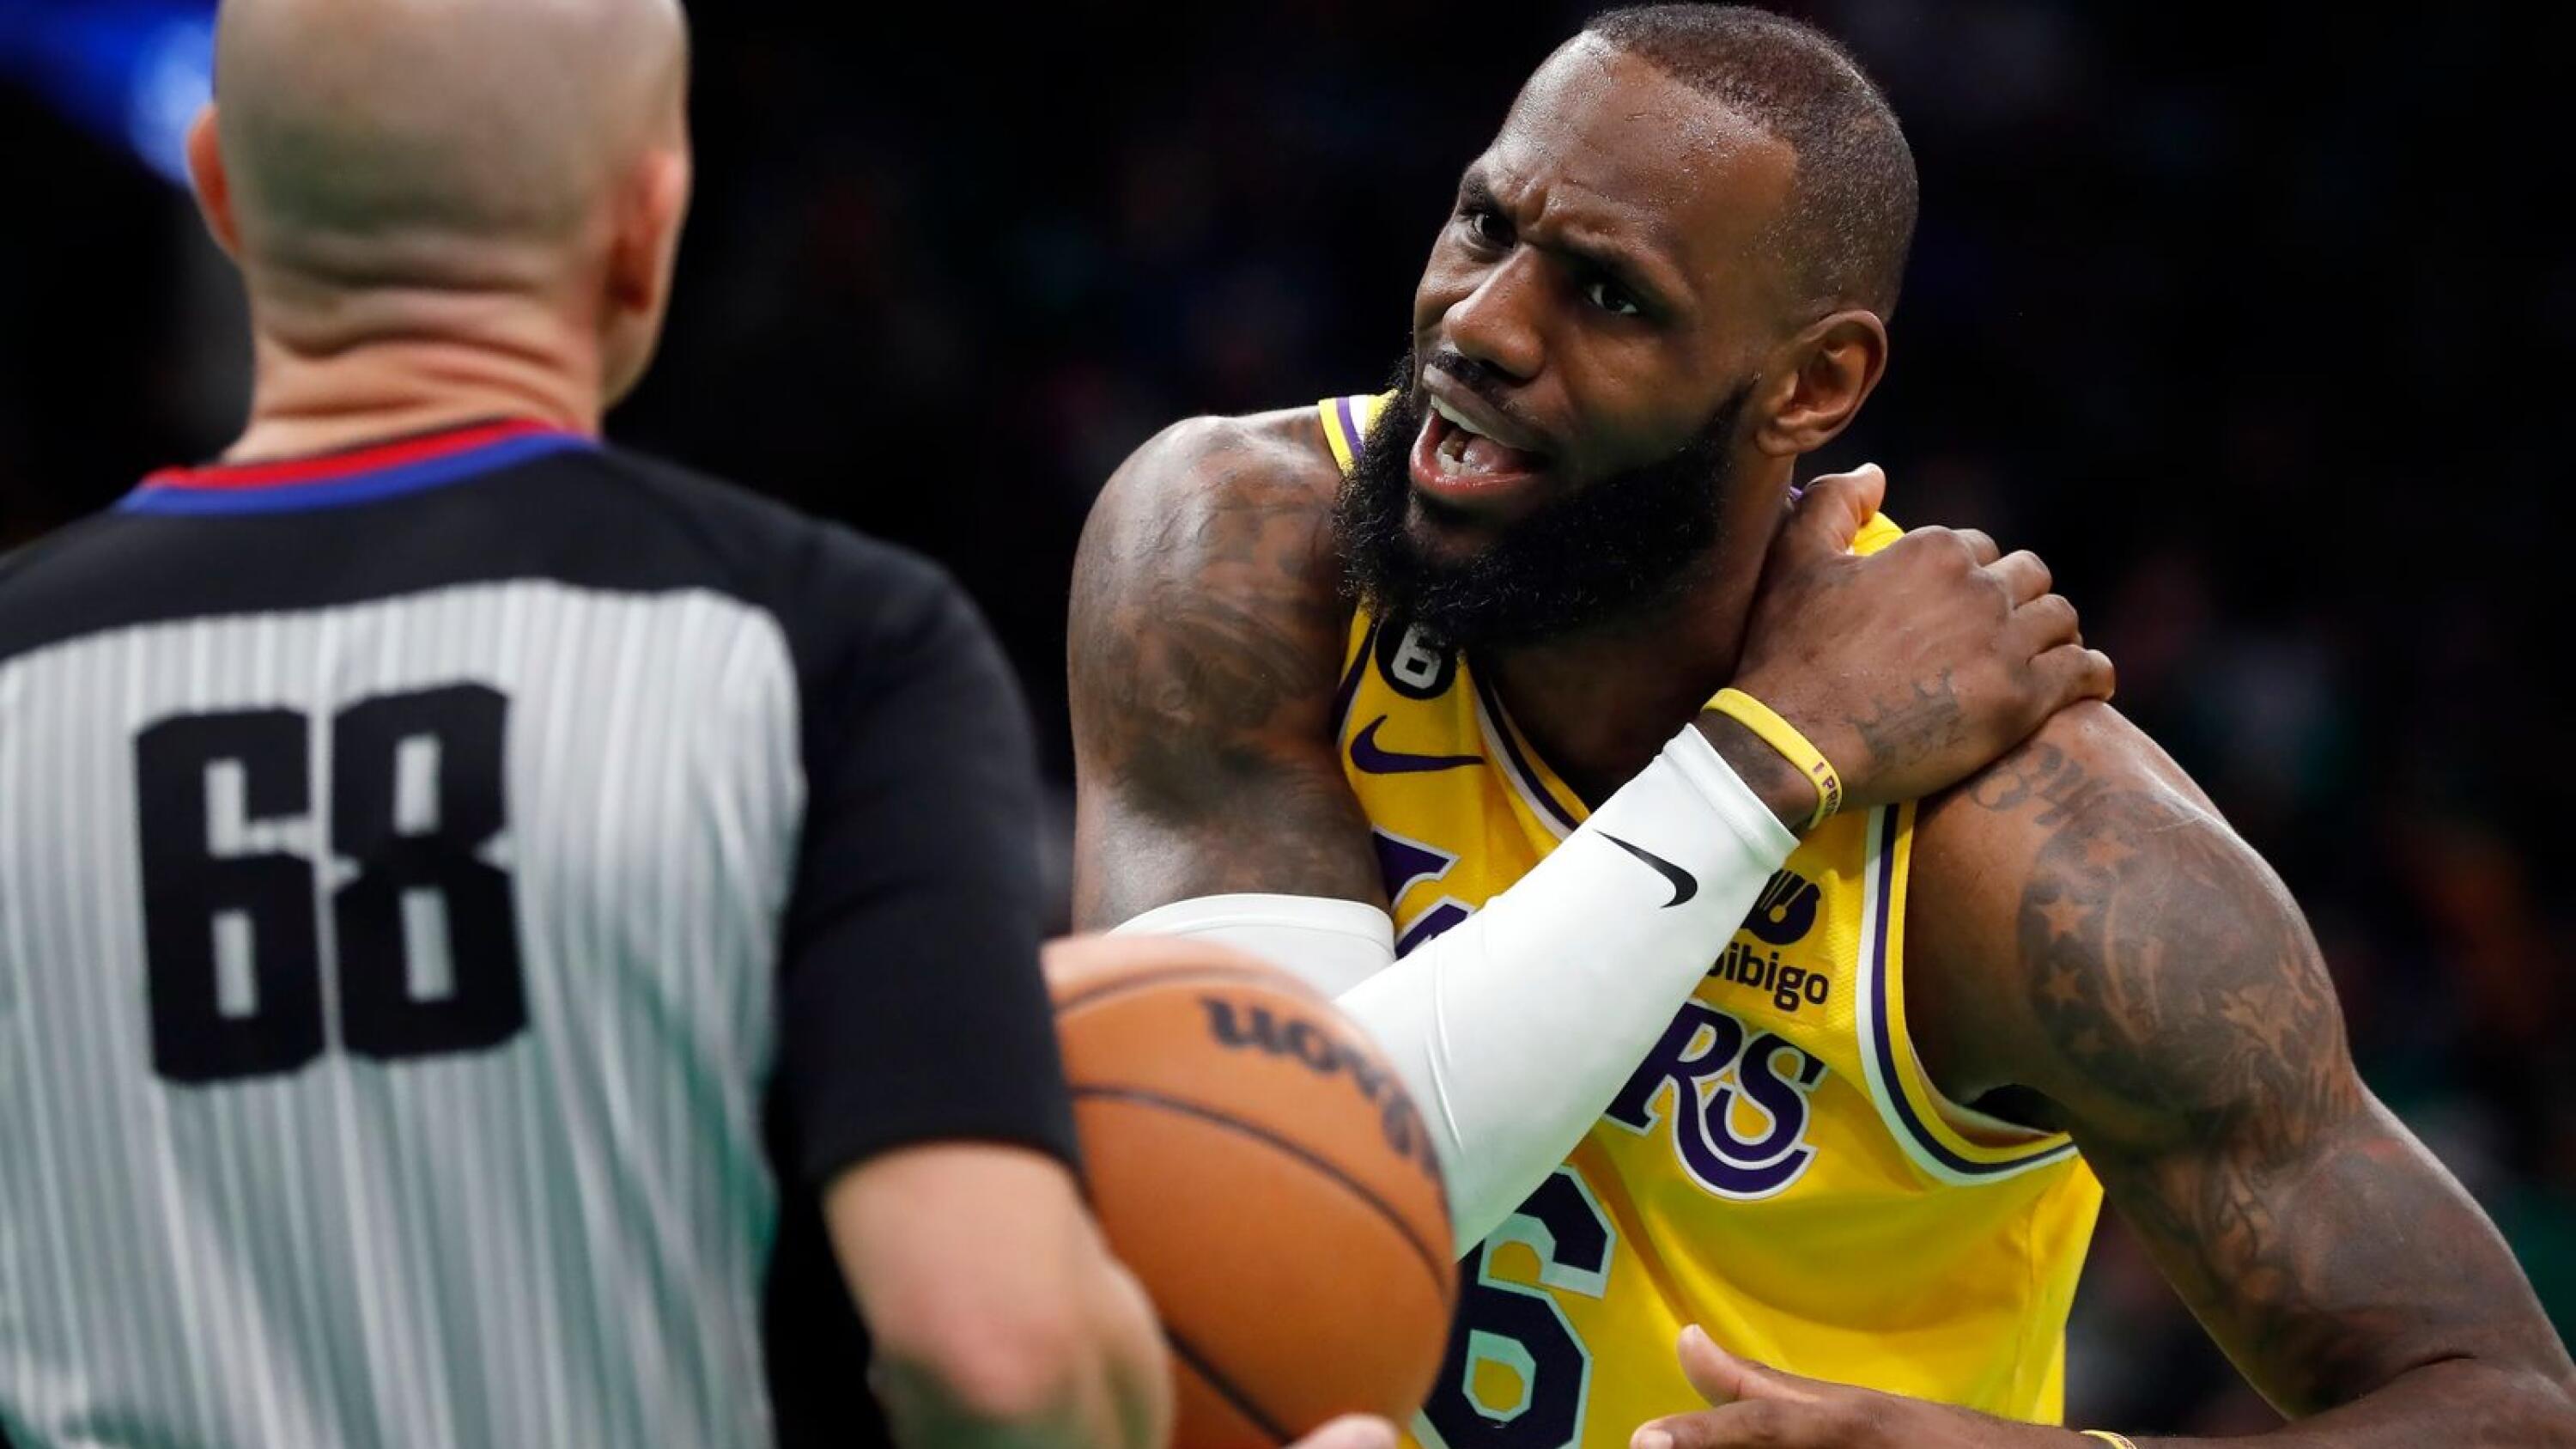 Referees' union says LeBron James was fouled on controversial play